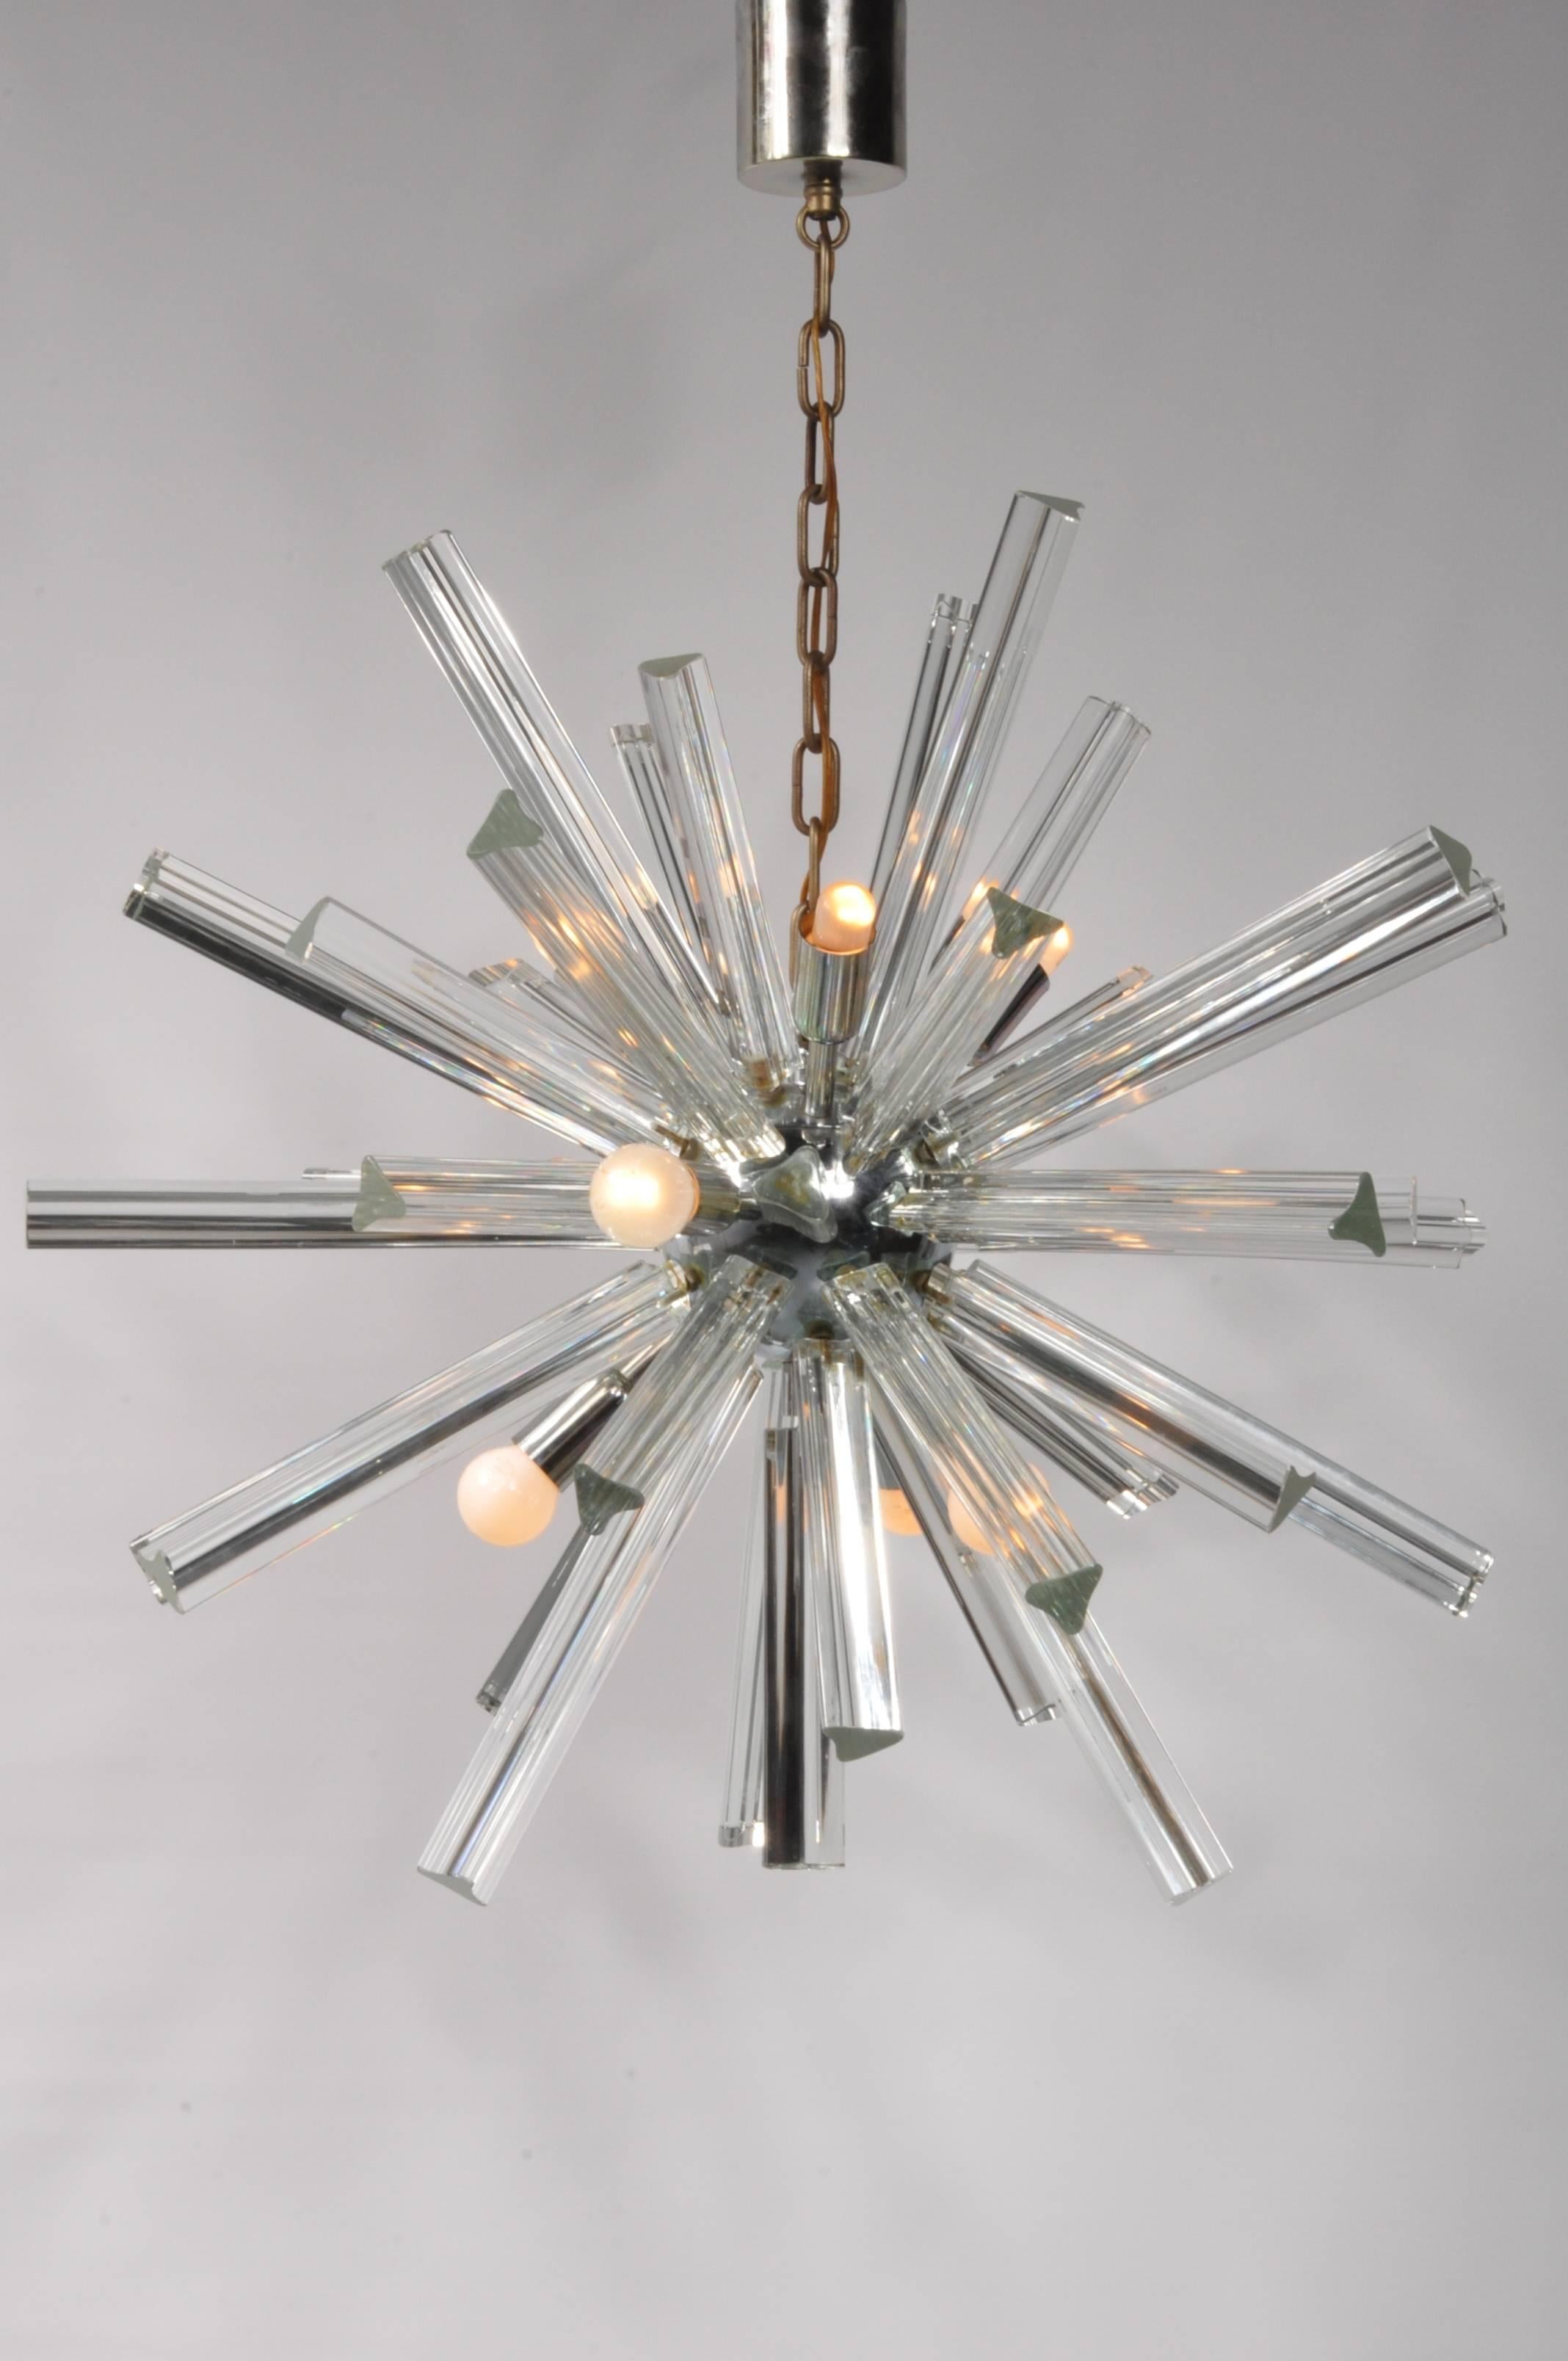 A beautiful glass chandelier manufactured by Camer Glass in Italy, circa 1970.

This impressive piece is made of a round, chrome-plated metal sphere holding many clear Murano glass prisms in different lengths. Combined with the several round light